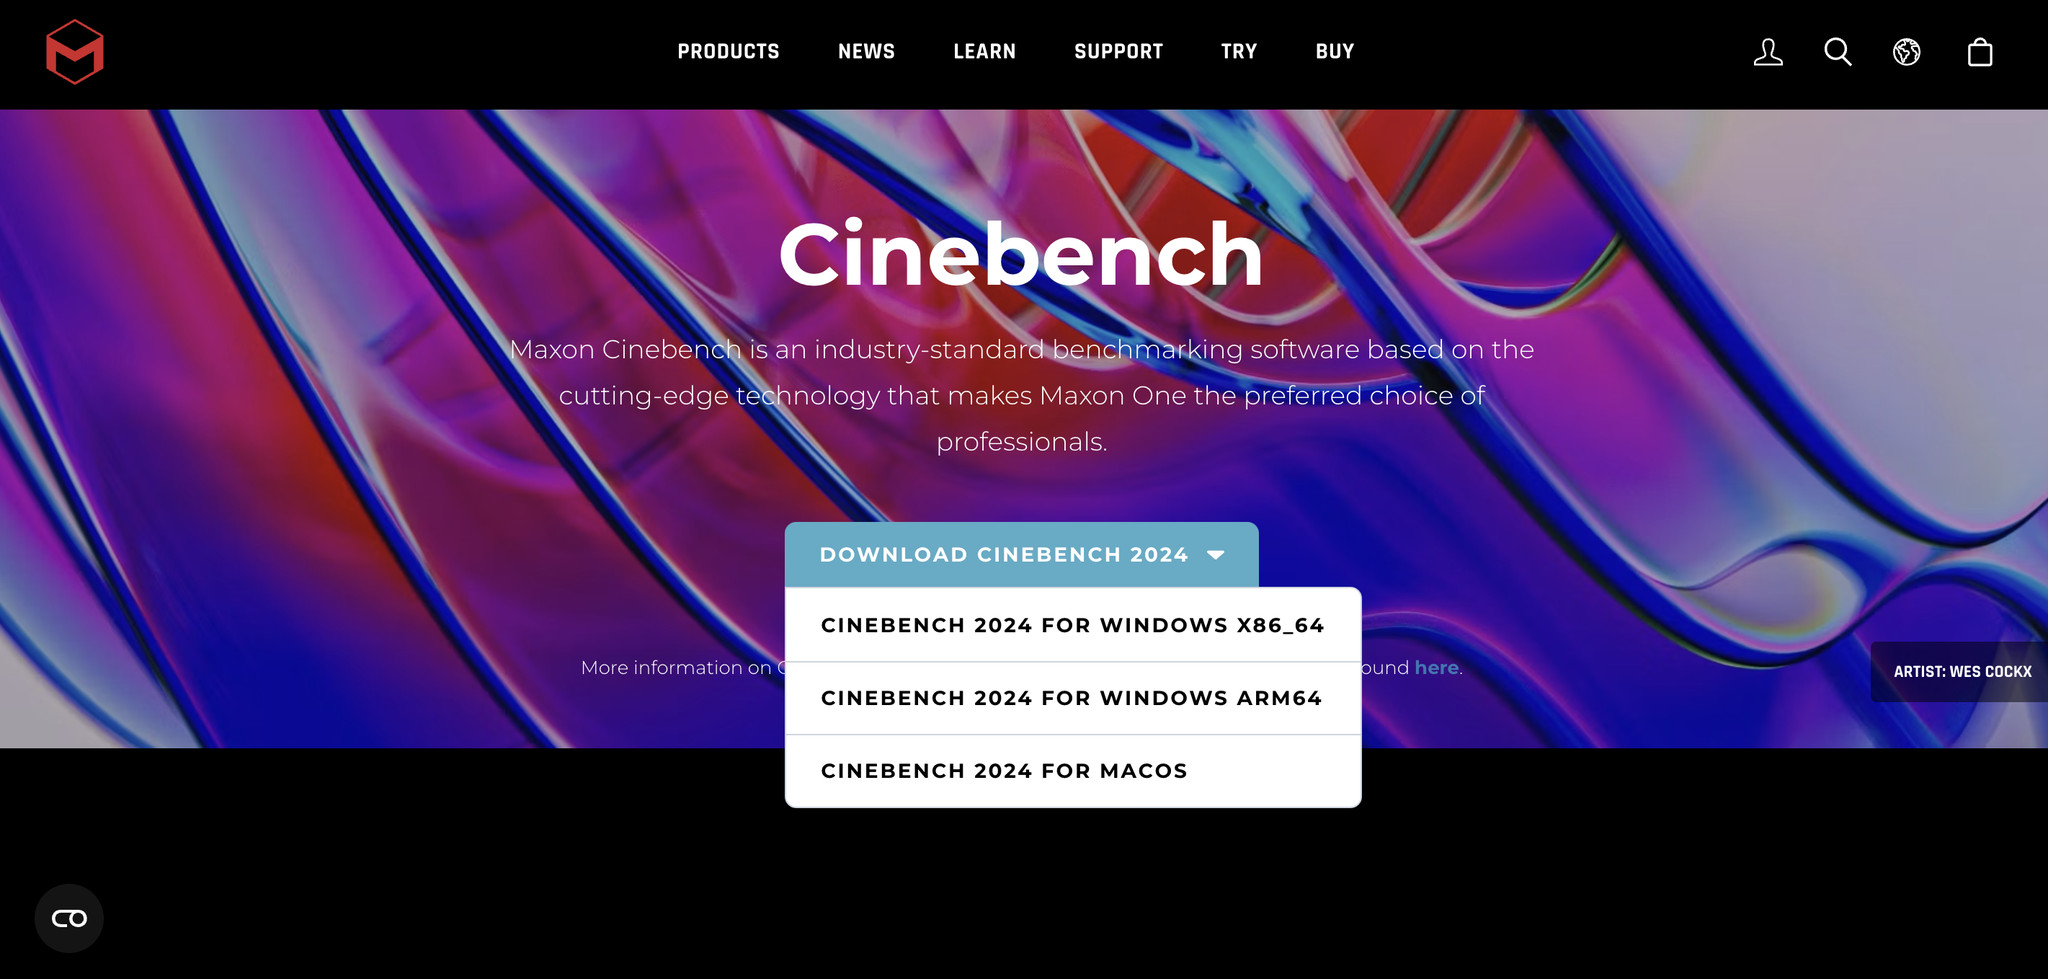 download the last version for windows CINEBENCH 2024